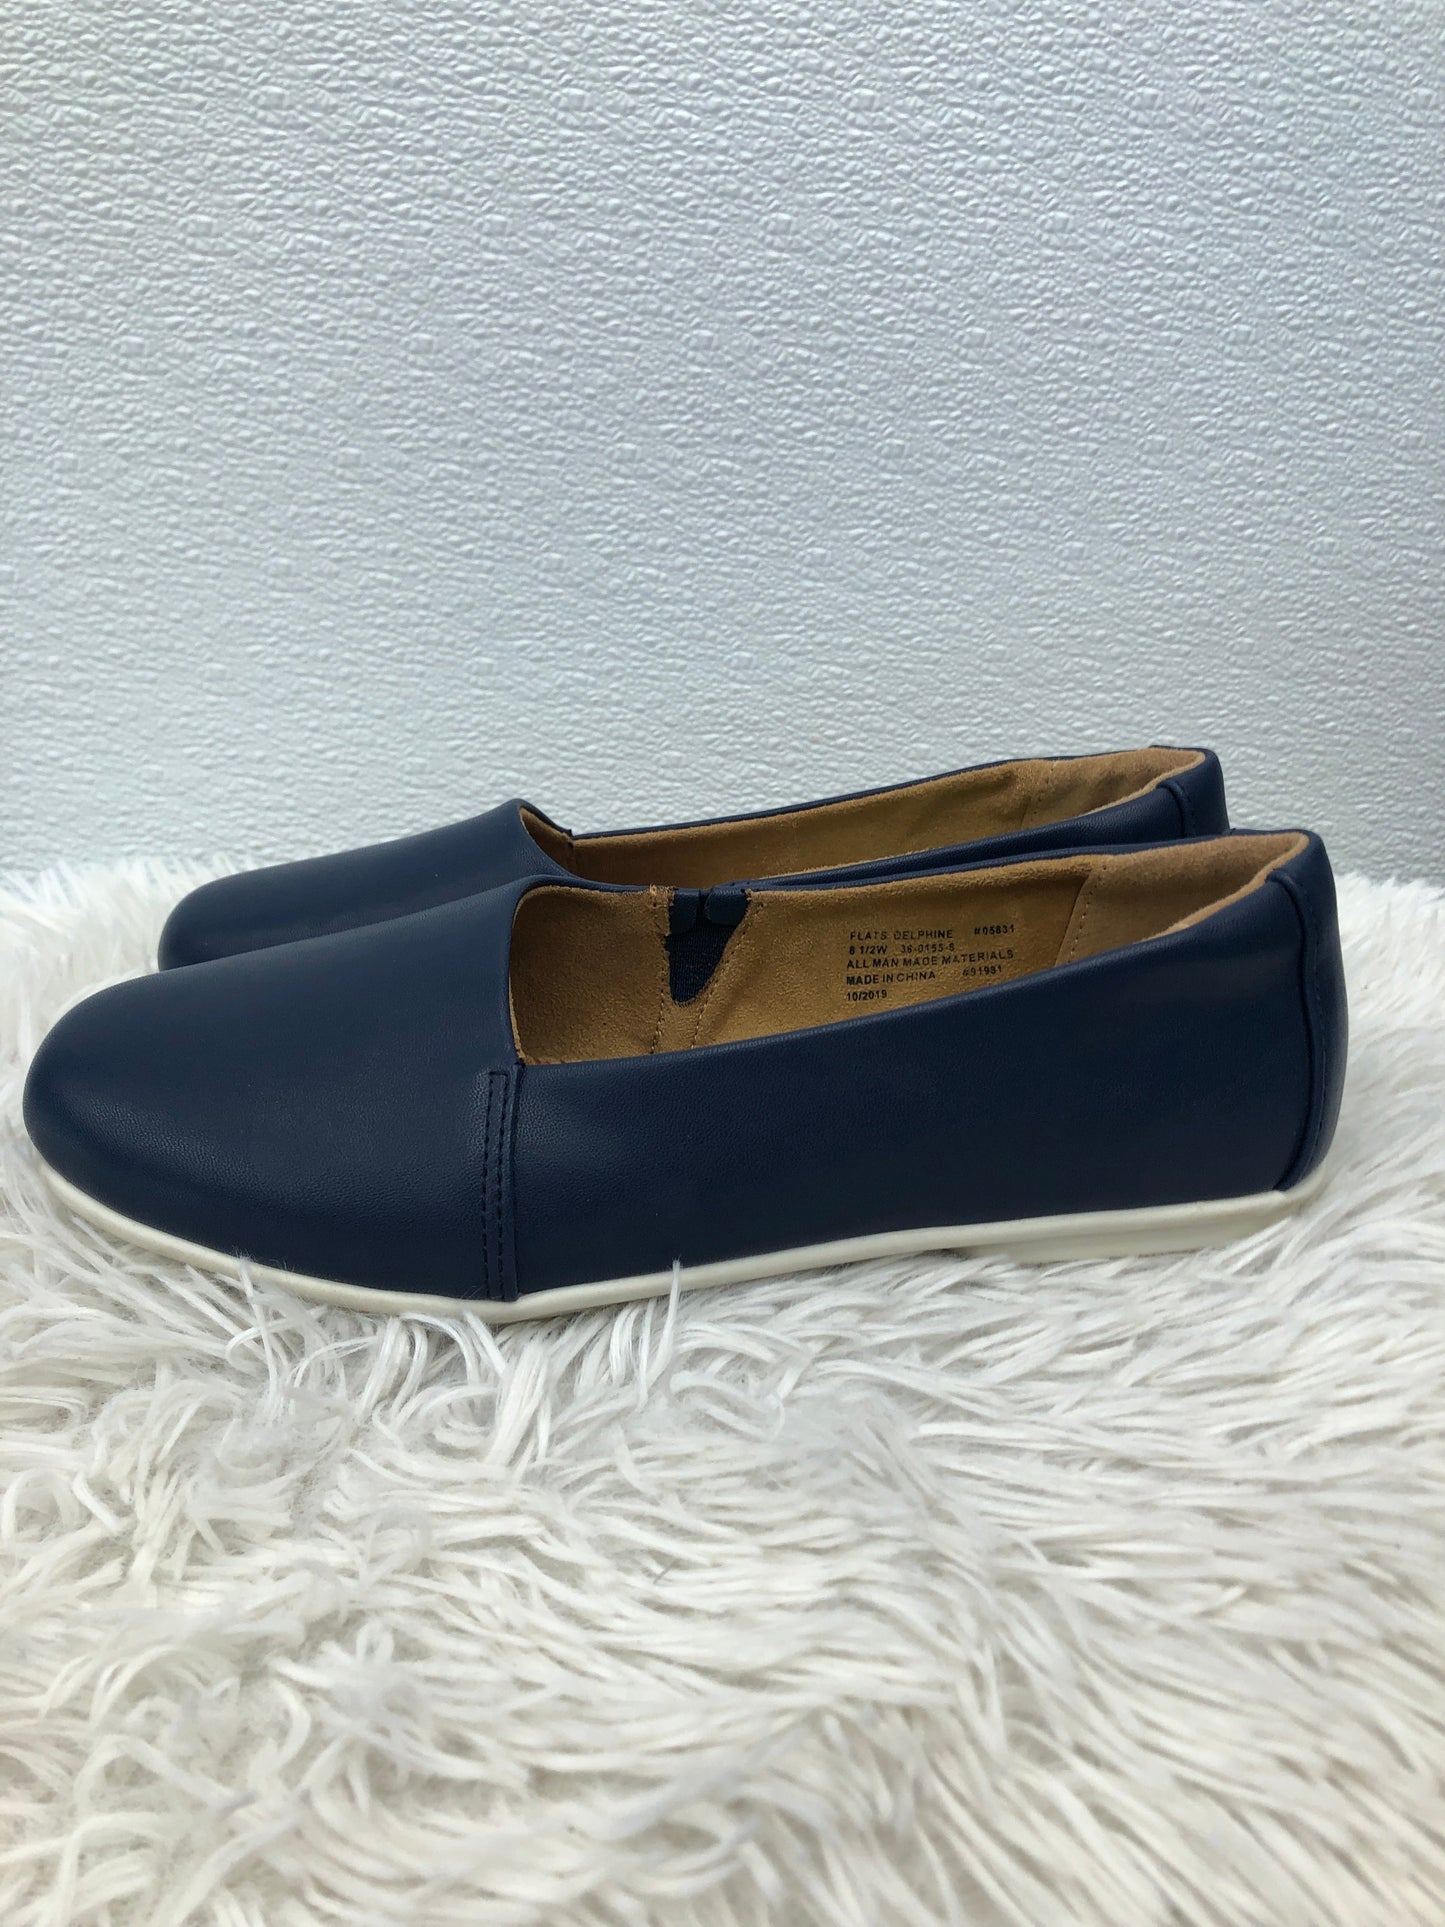 Shoes Flats Other By Comfortview  Size: 8.5